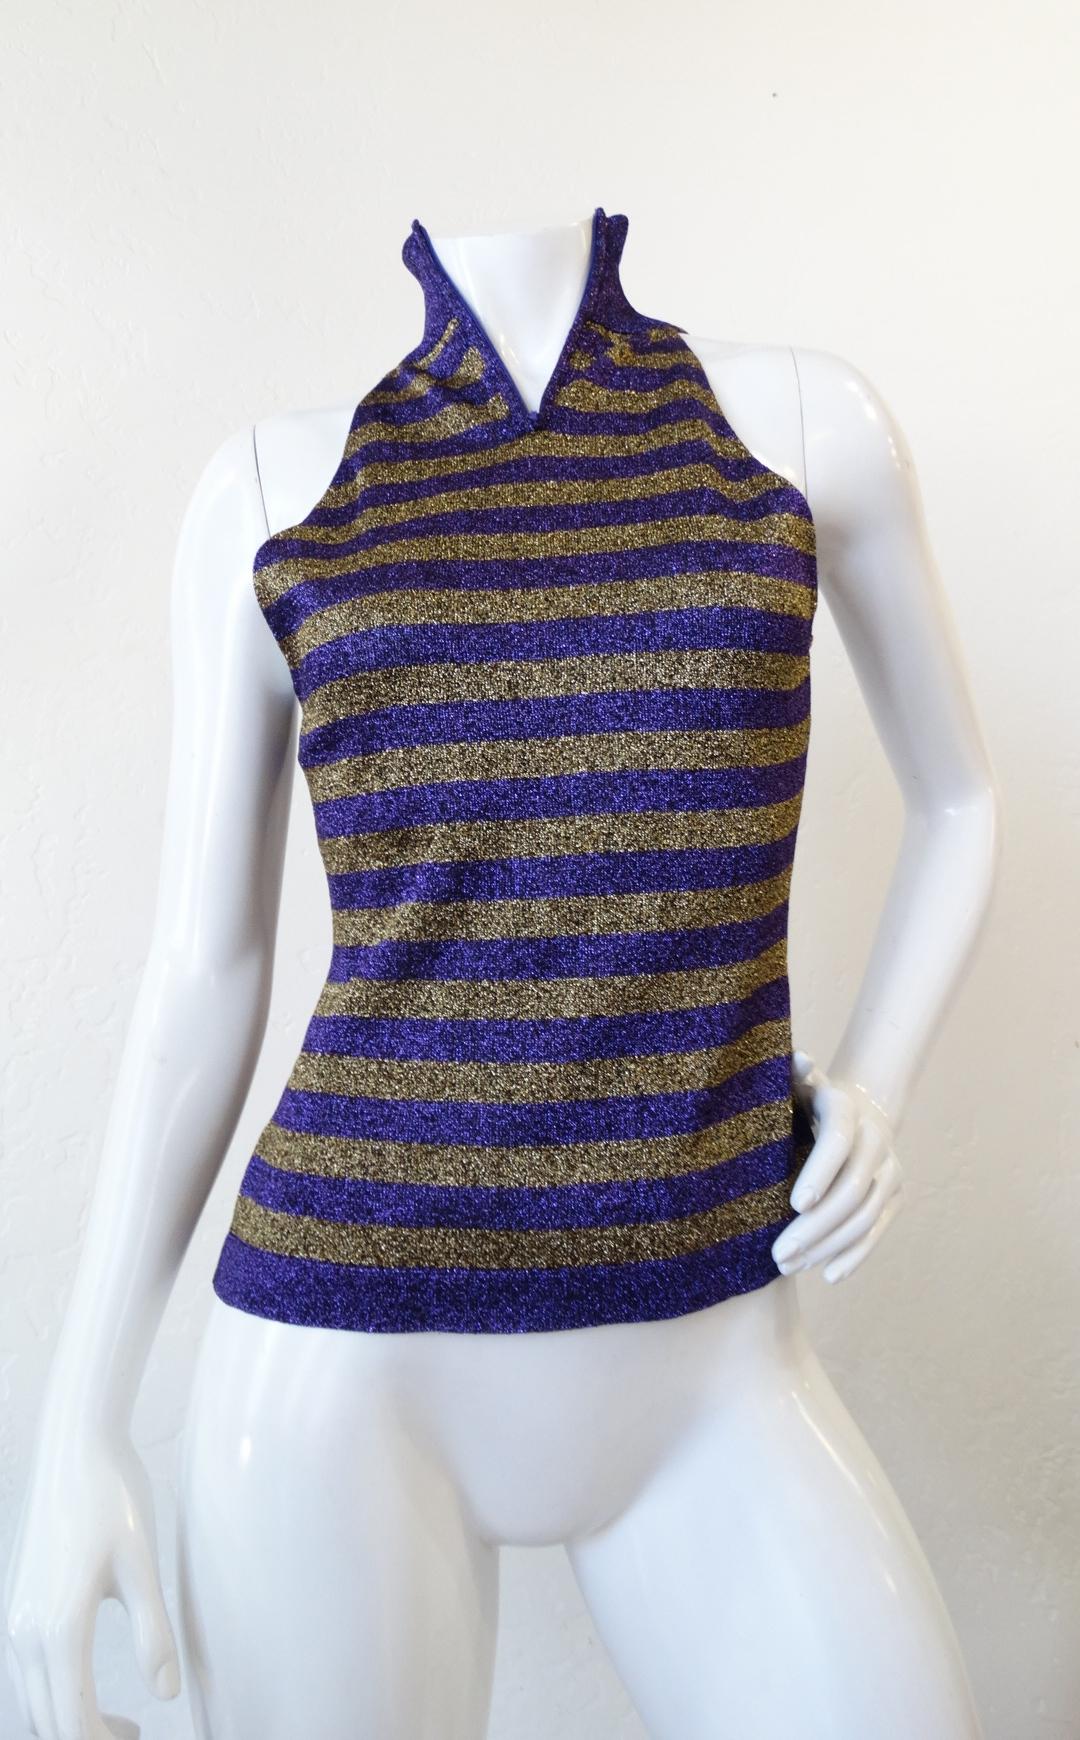 Incredible lurex knit top from iconic designer Gianni Versace circa 1980s! Shimmering lurex knit in purple and gold horizontal striped pattern. Sleeveless turtleneck style silhouette with hidden zipper up the back of the neck. Made in Italy. Easily